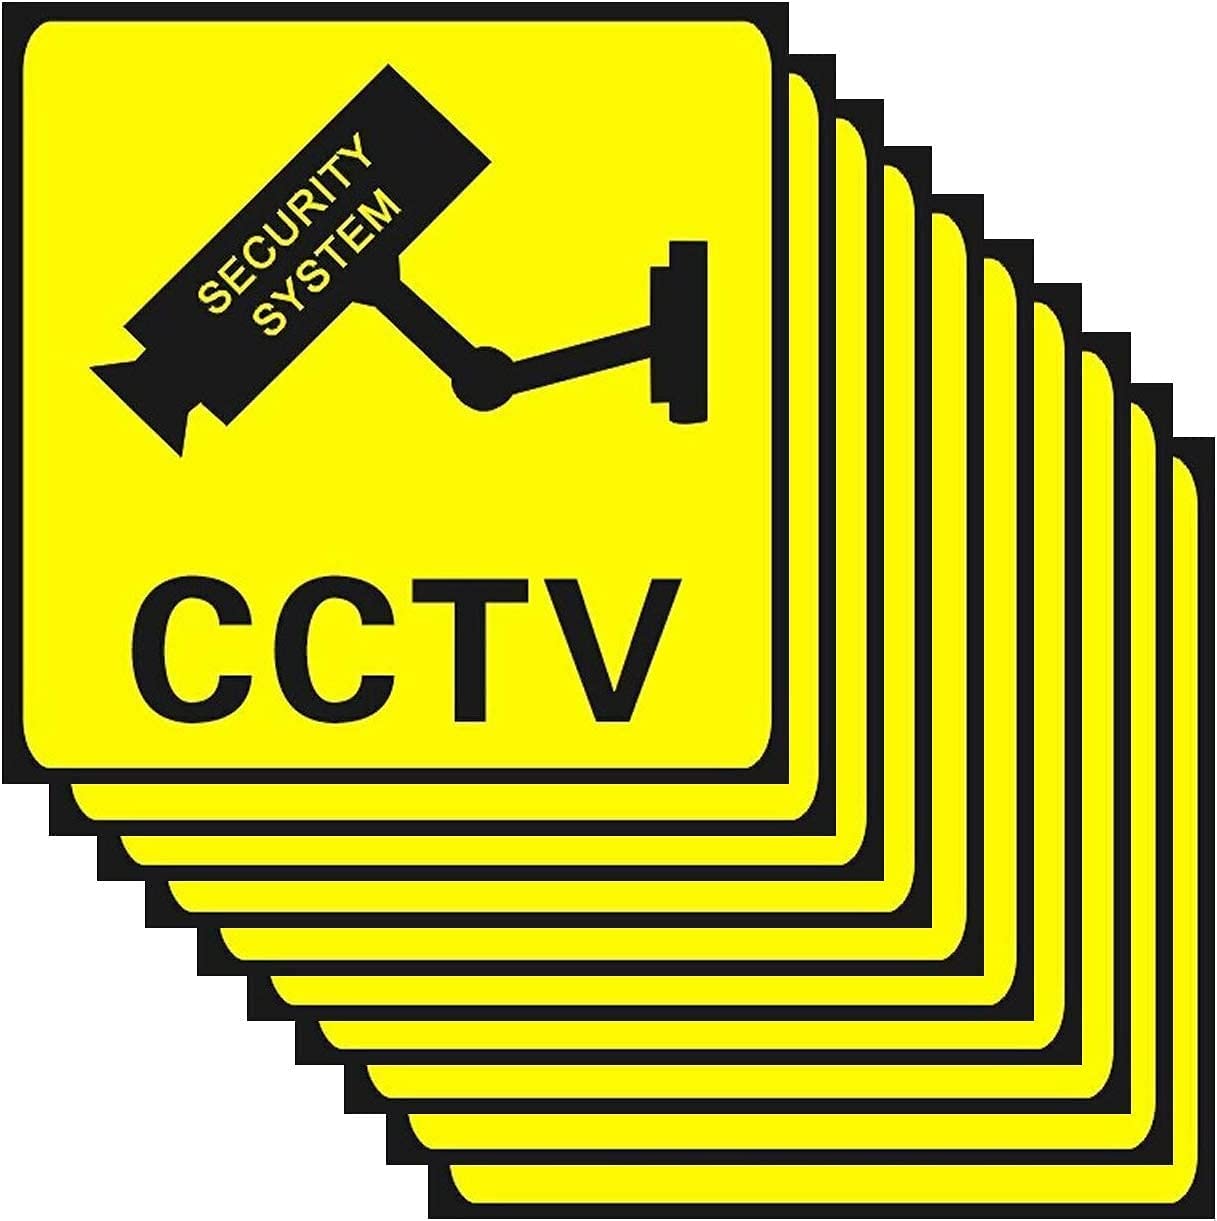 A sticker showing the location being monitored by cameras